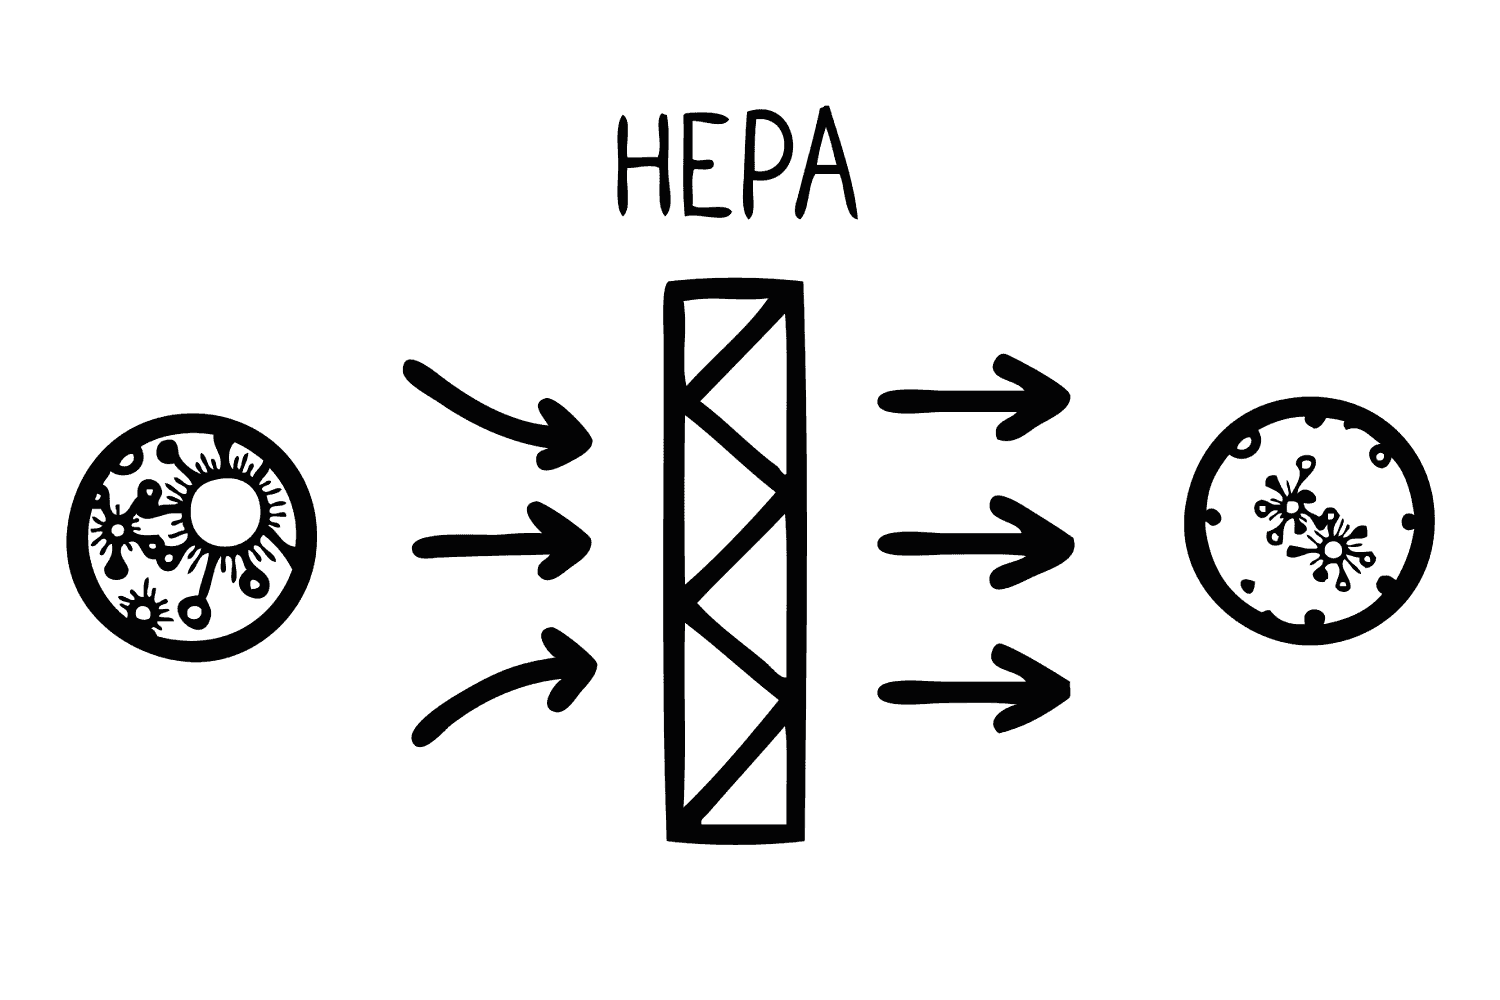 HEPA filters remove at least 99.97% of particles that are 3 micrometres in diameter